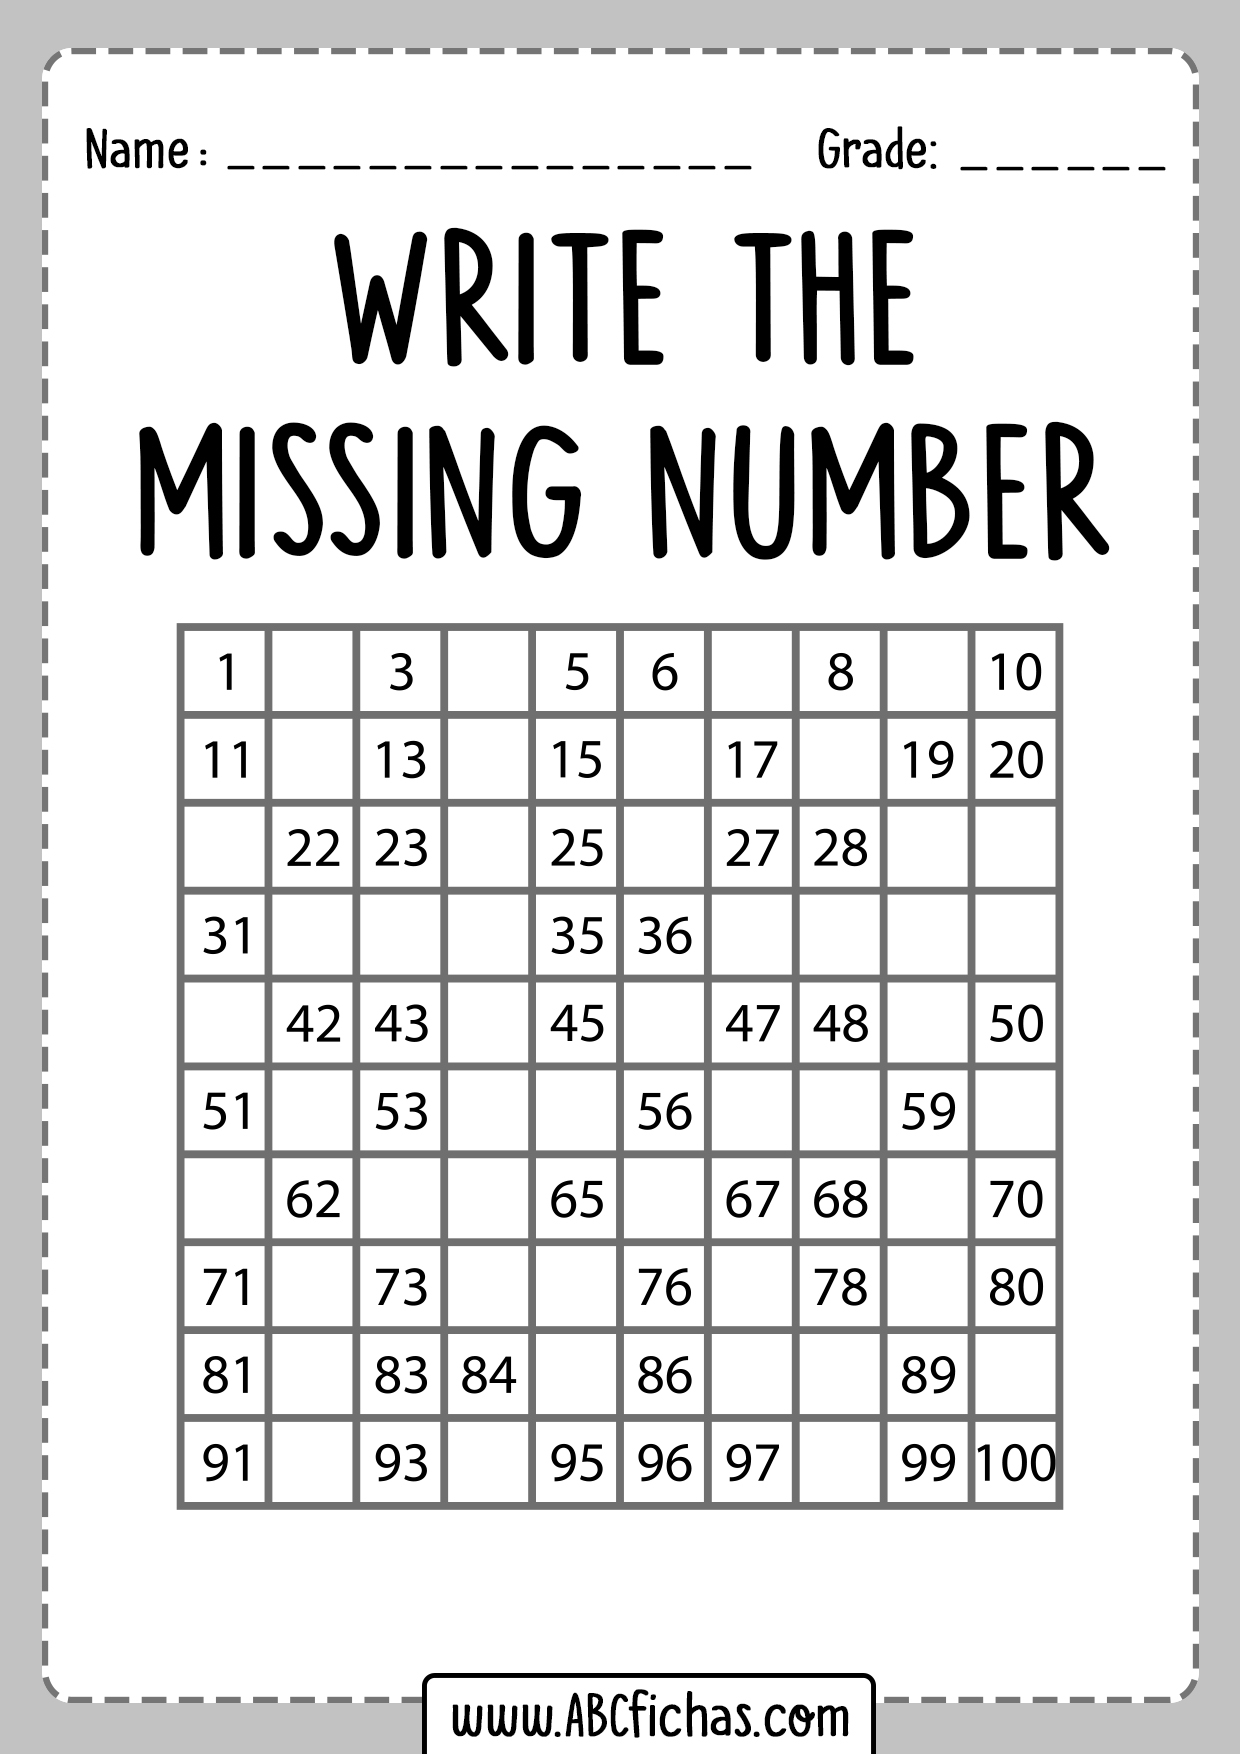 write-the-missing-number-printable-worksheet-abc-fichas